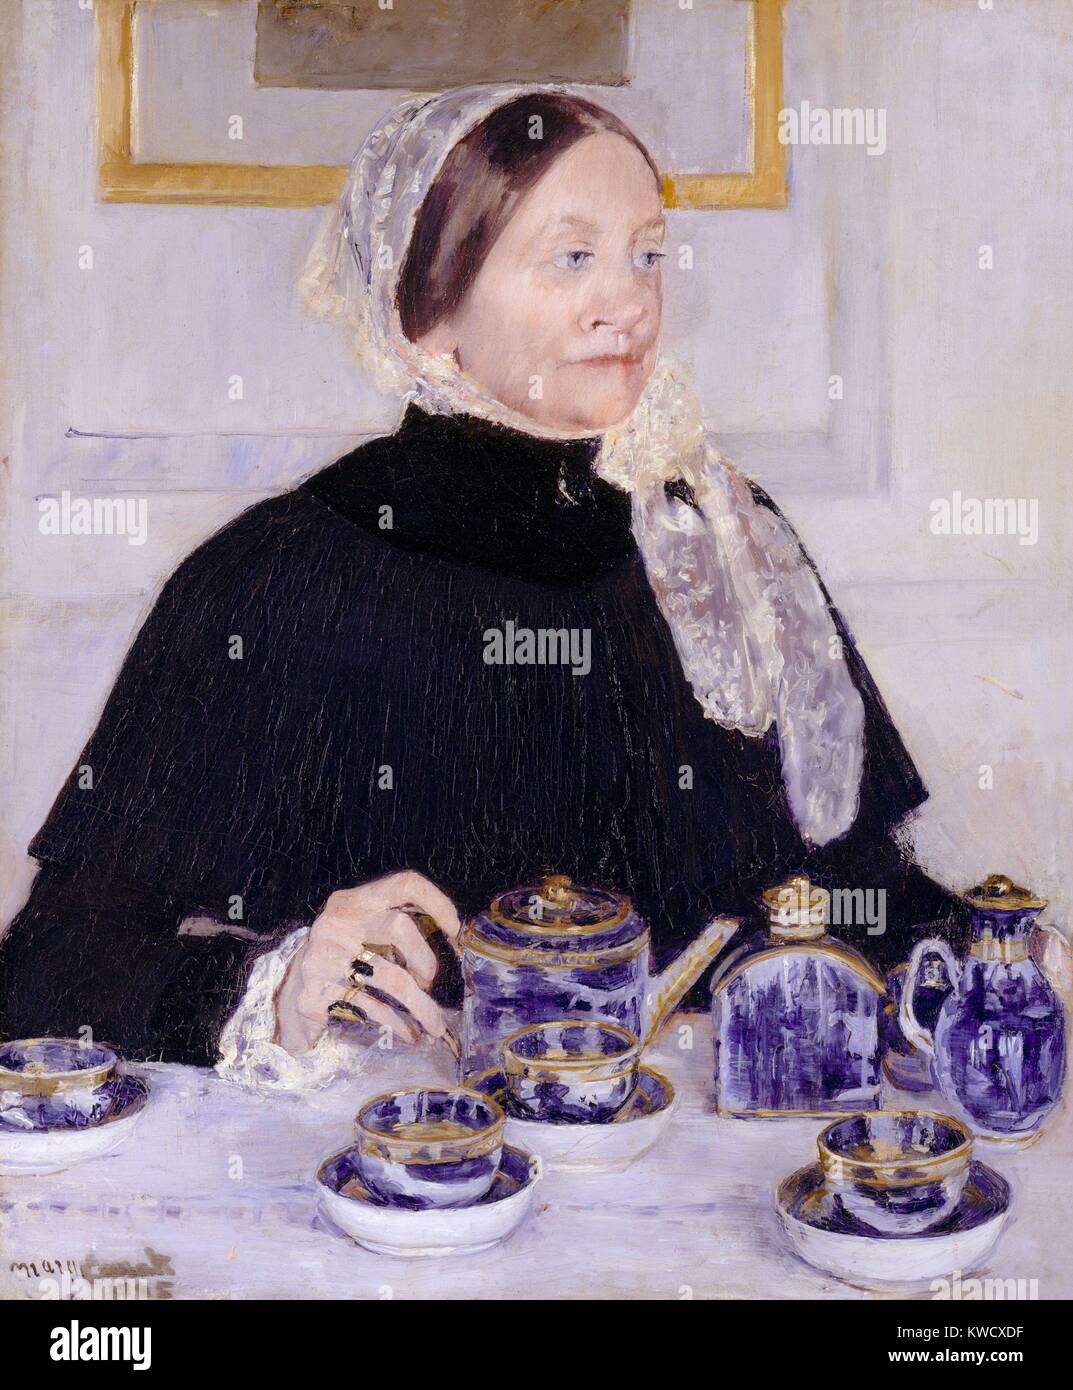 Lady at the Tea Table, by Mary Cassatt, 1883-85, French impressionist painting, oil on canvas. Mary Dickinson Riddle, a Cassatt family cousin, painted with a gilded blue-and-white Canton porcelain service, she gave to her Cassatt relatives. Mary painted this portrait in response to the gift, but the Riddle family didnt like the painting and it remained in the artists collection (BSLOC 2017 3 145) Stock Photo